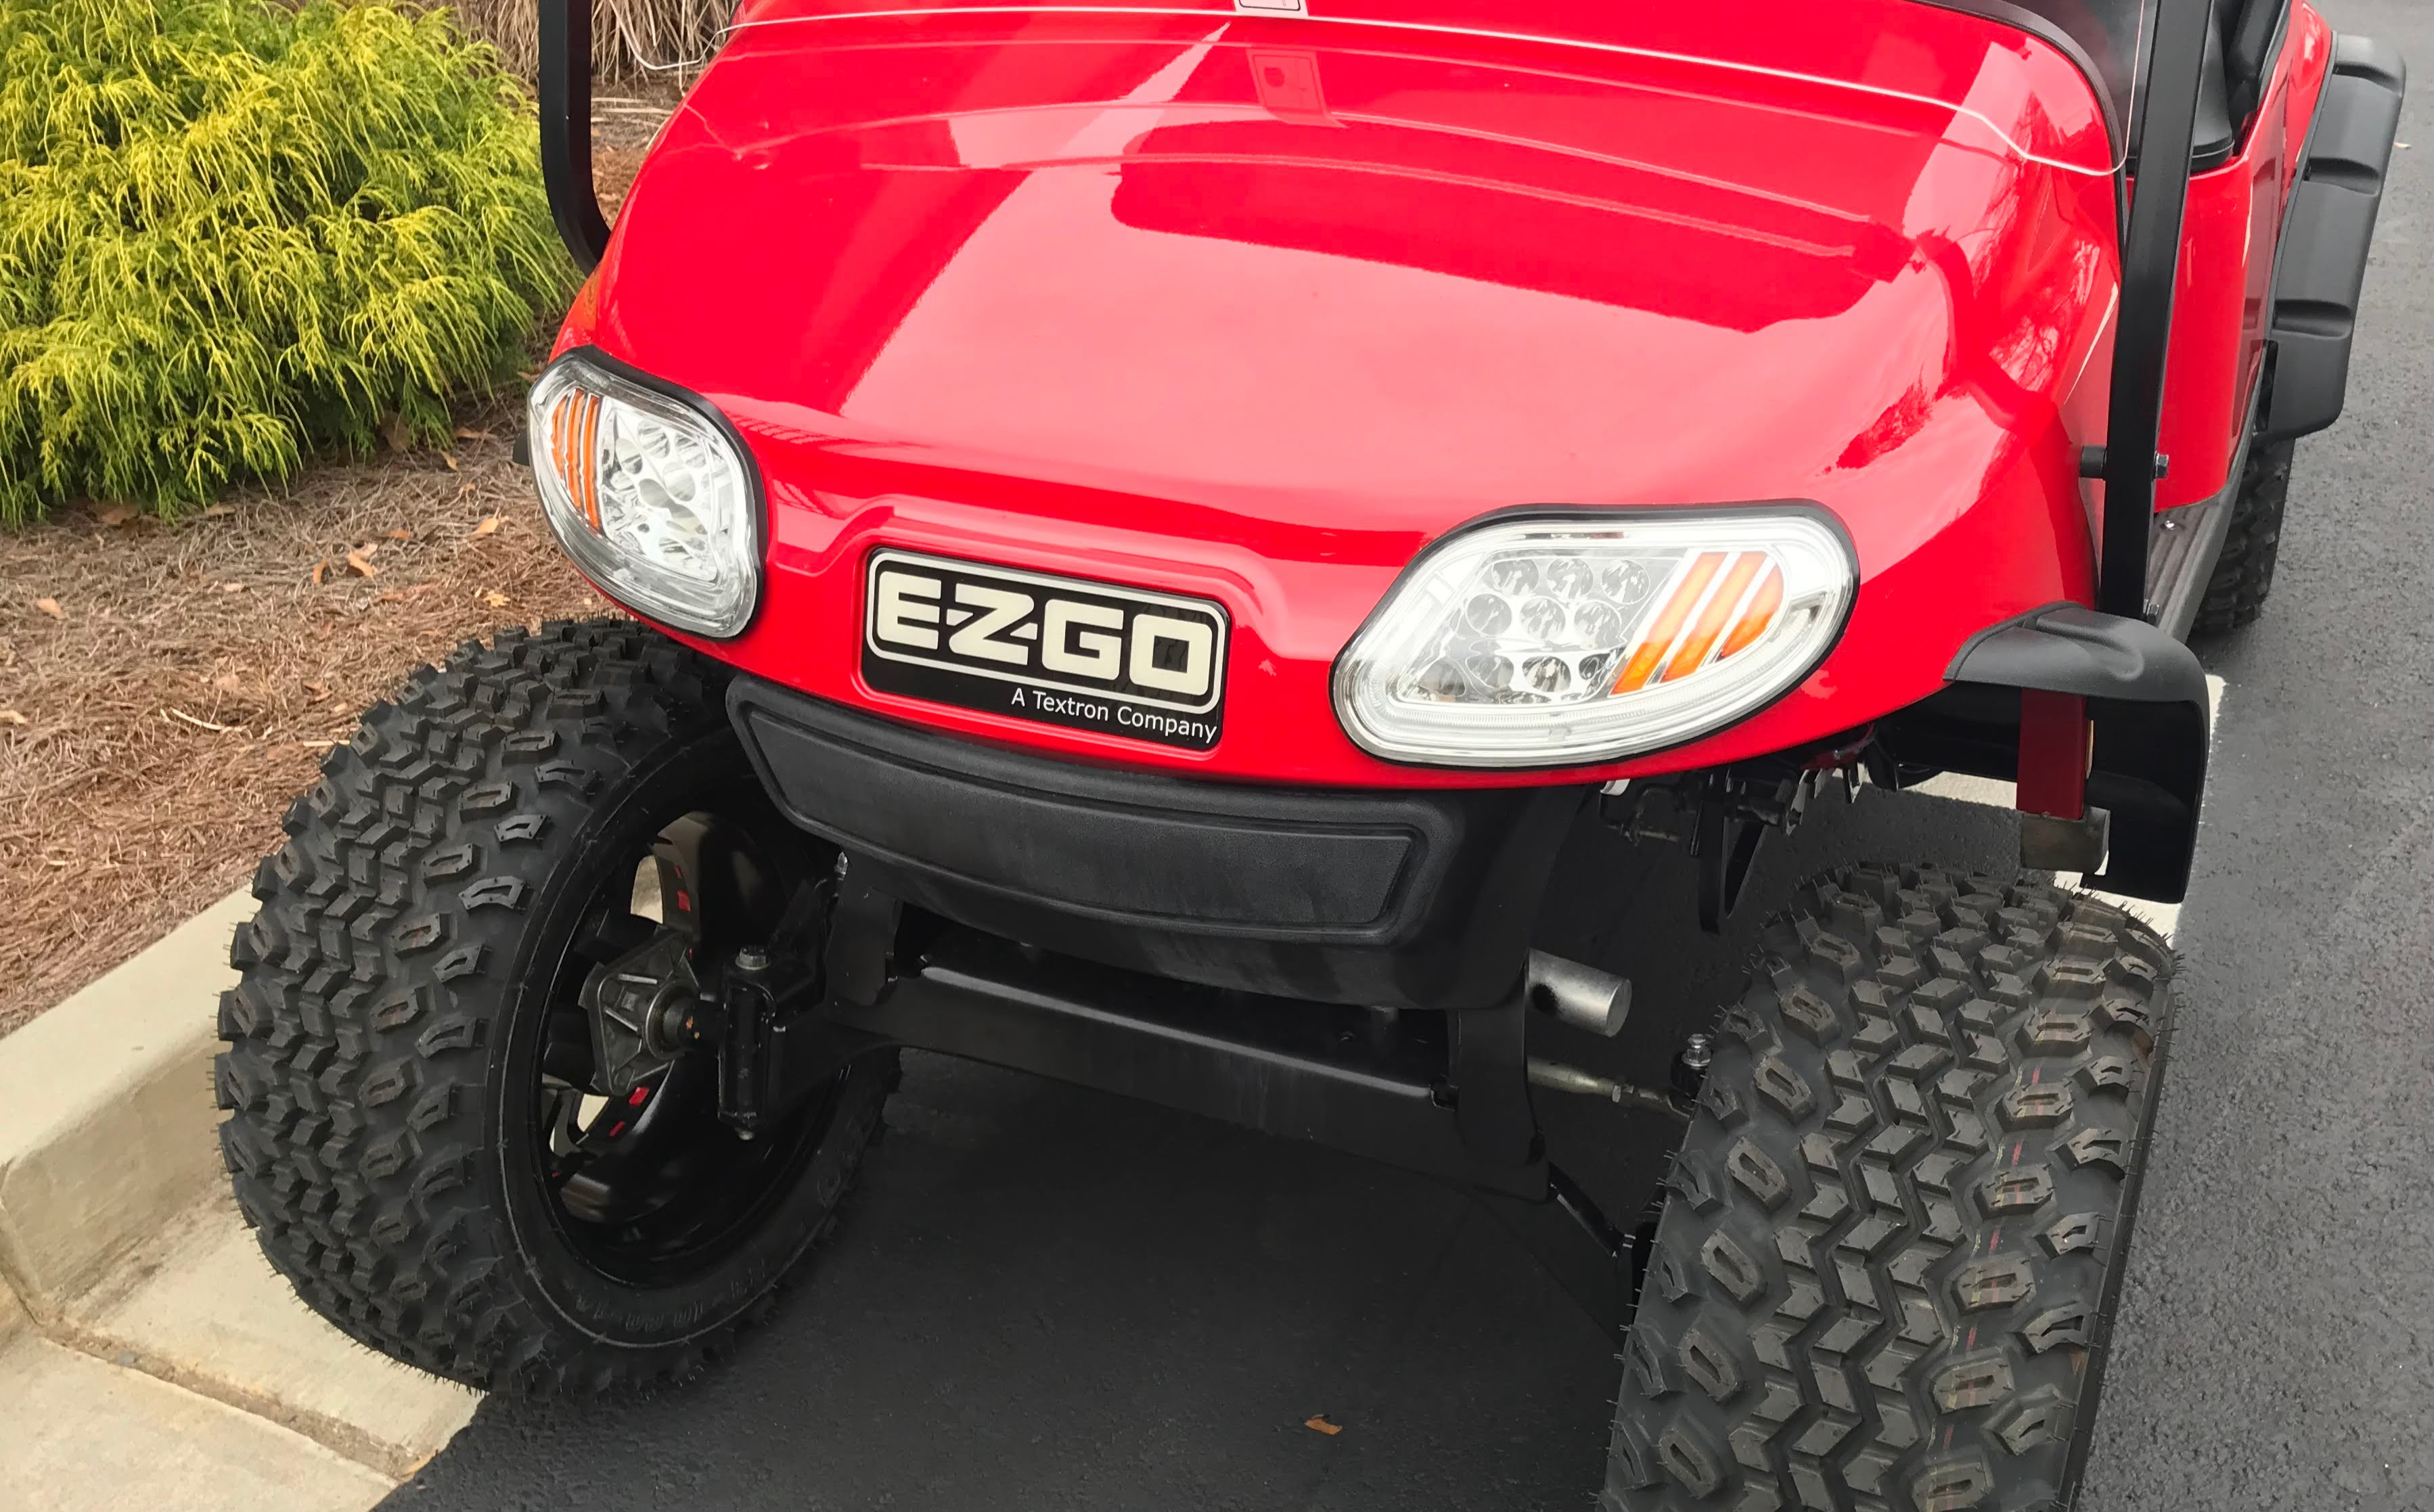 Finding your EZGO serial number